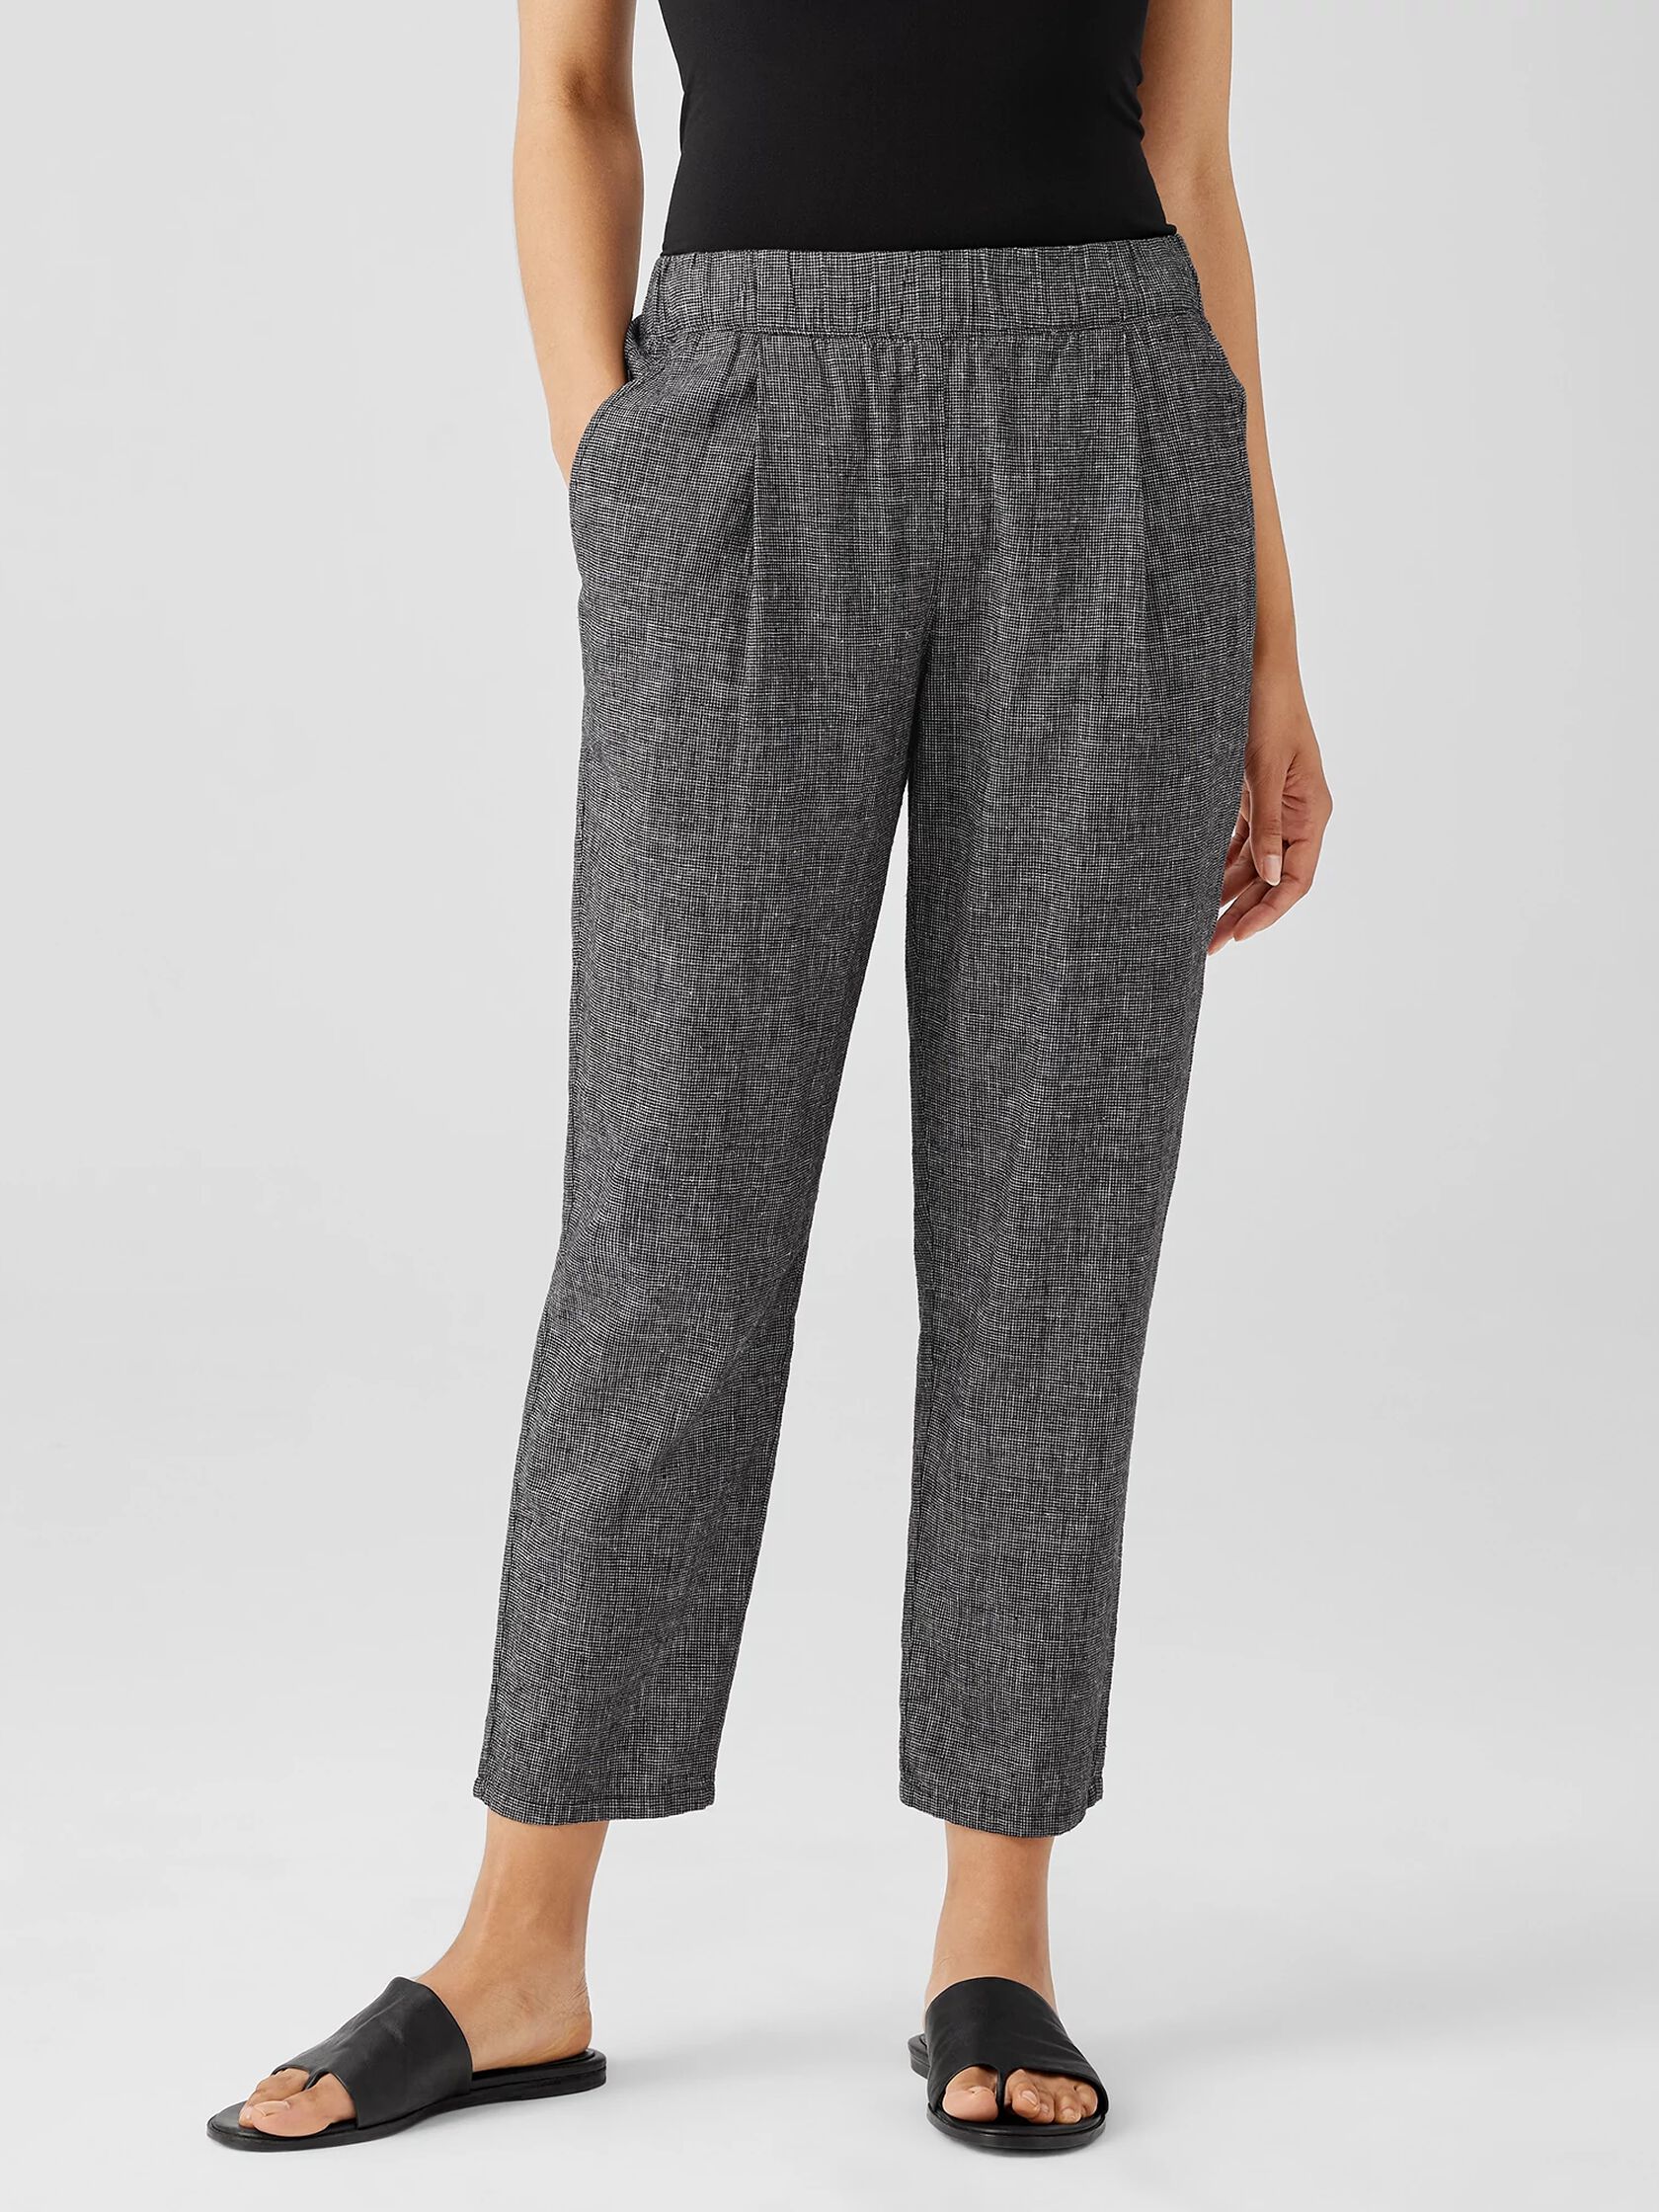 Hemp Cotton Grid Tapered Pant | EILEEN FISHER